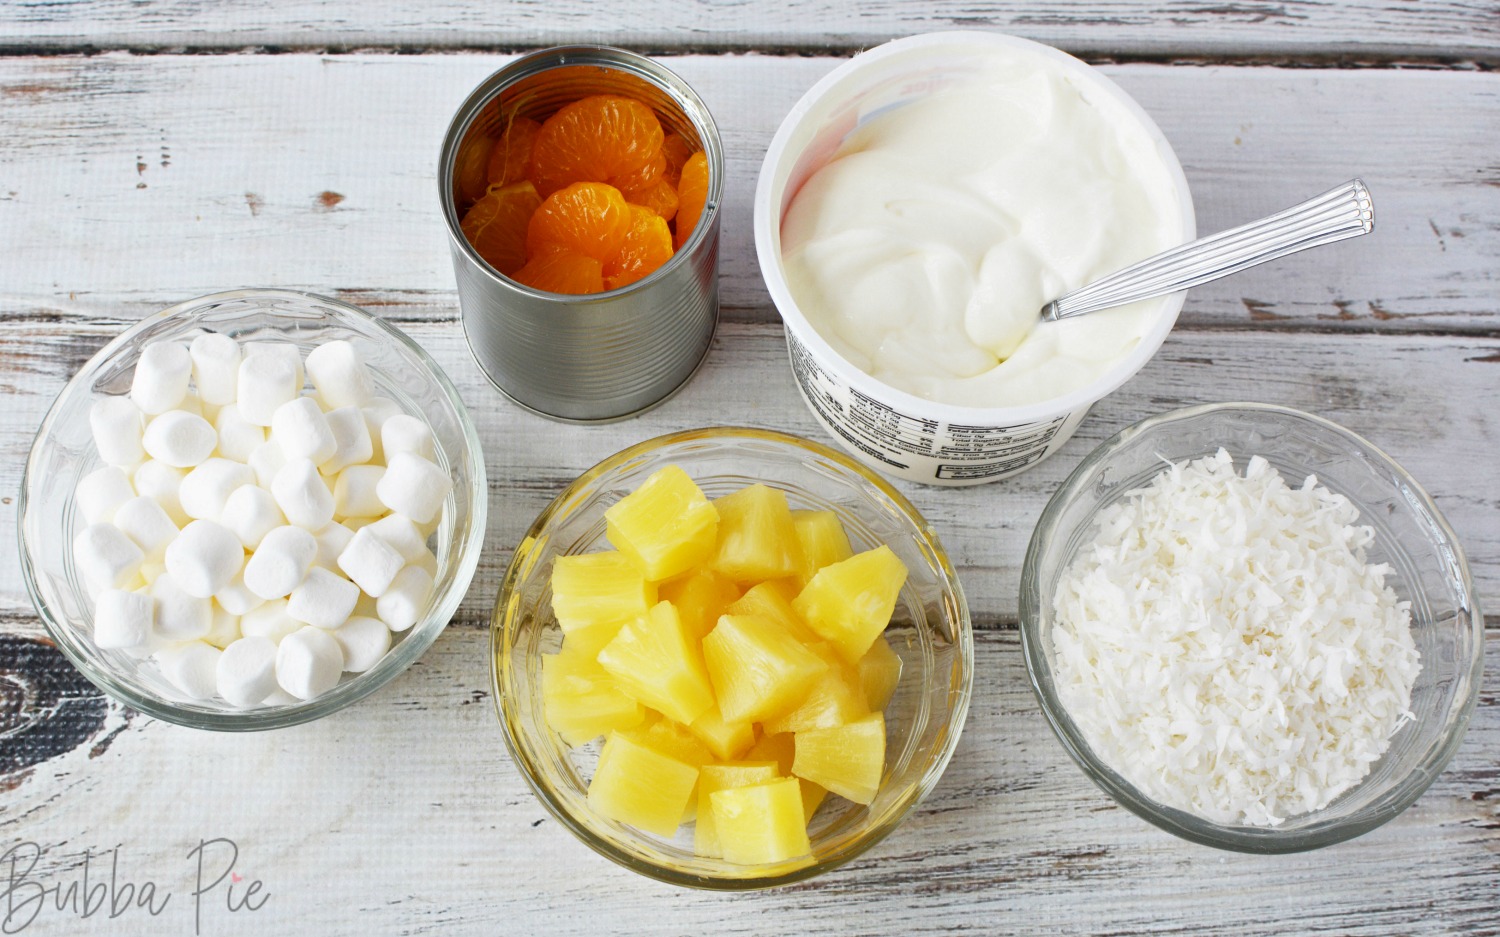 Ingredients for a Marshmallow Fruit Salad include pineapple, oranges, coconut and sour cream